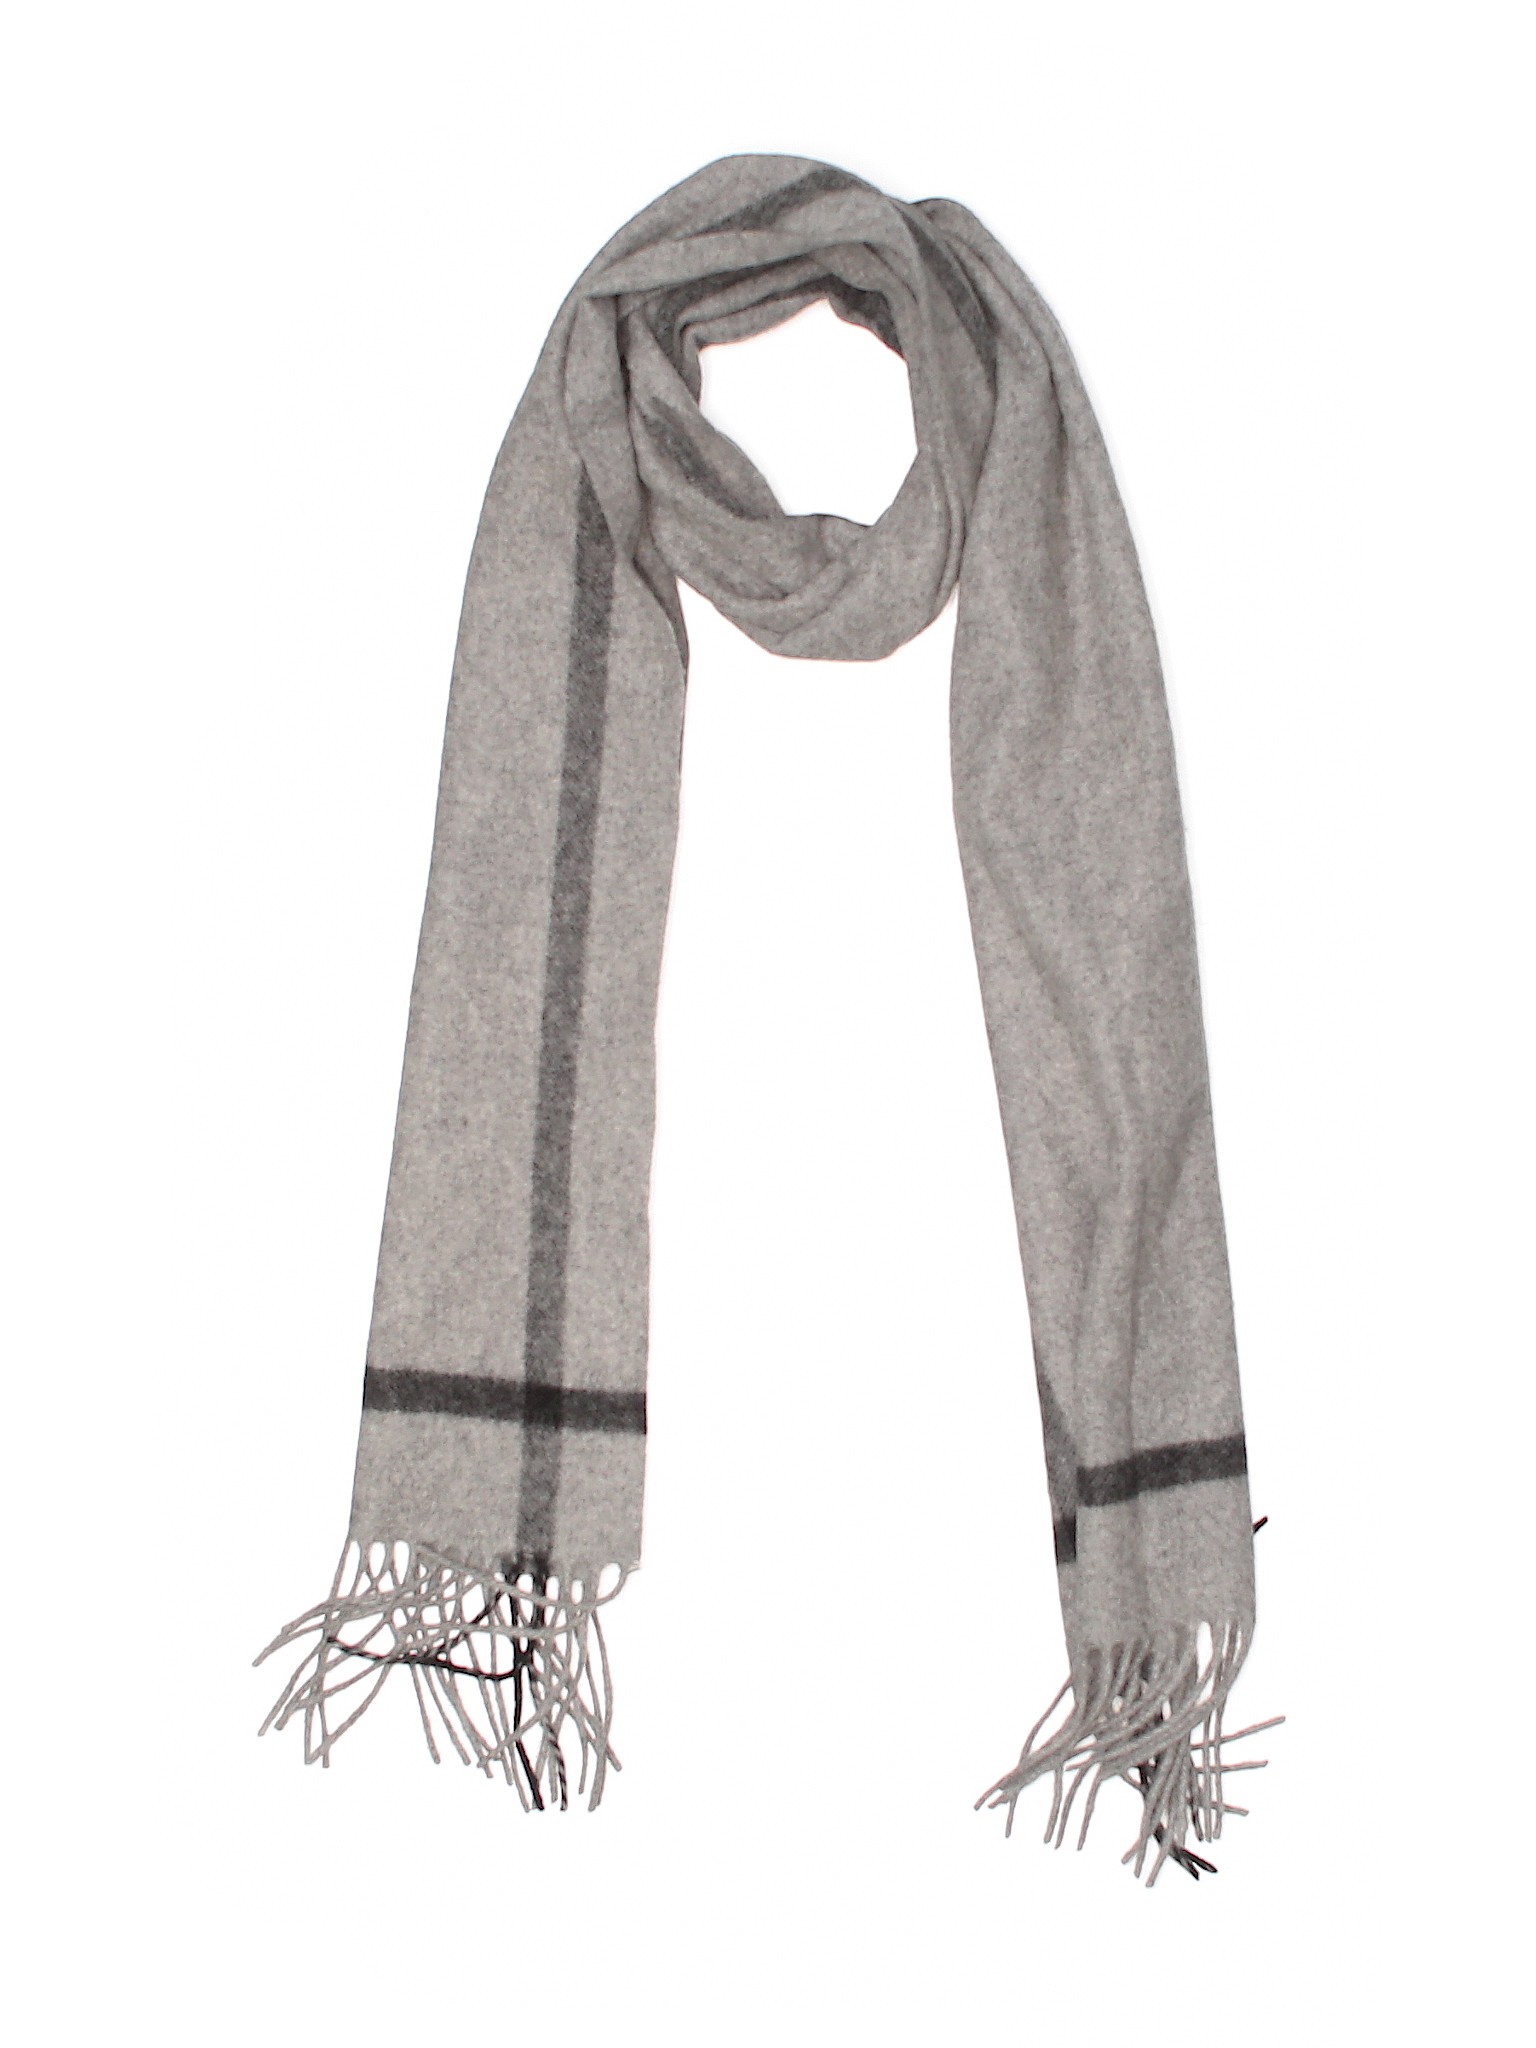 J.Crew Collection Women Gray Cashmere Scarf One Size | eBay